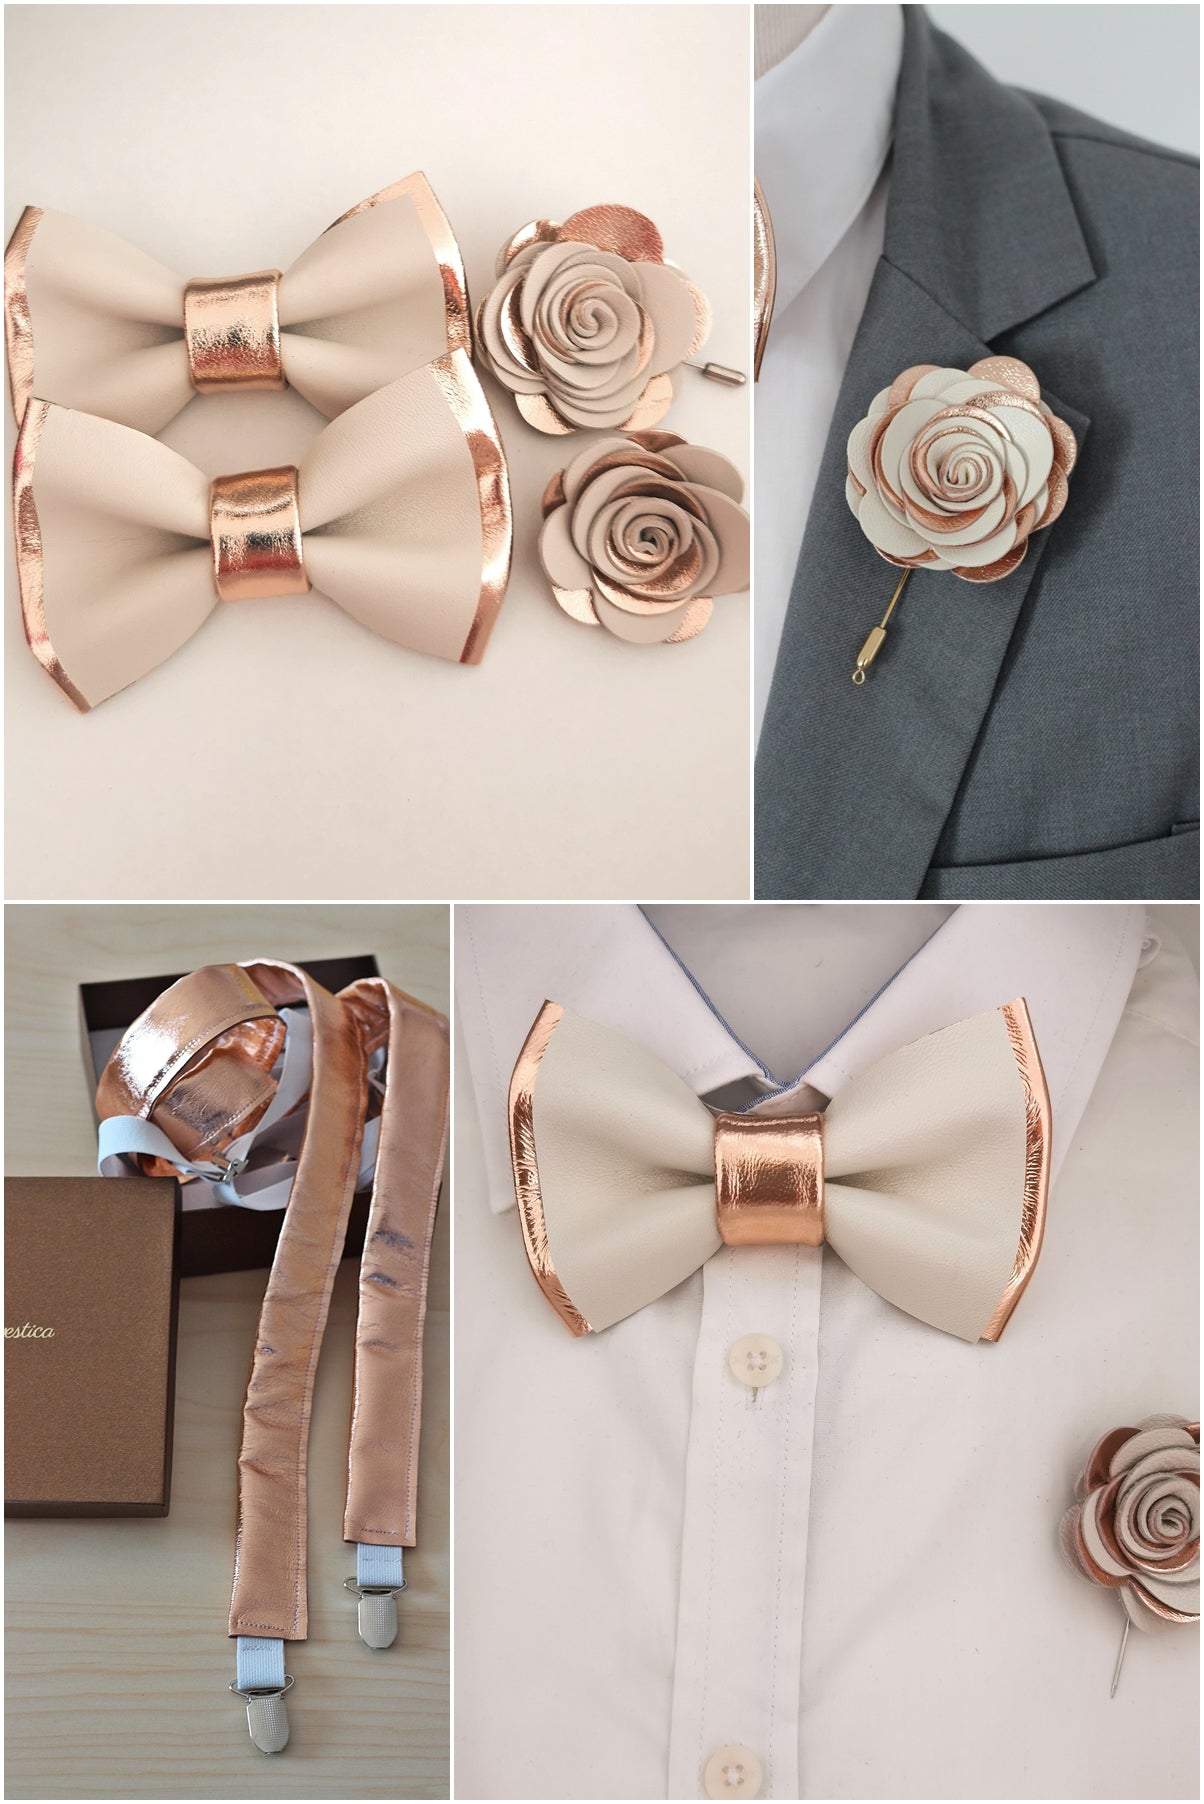 Gold and White Groomsmen Suit Bow Tie Set Bow Tie Men & 2pin